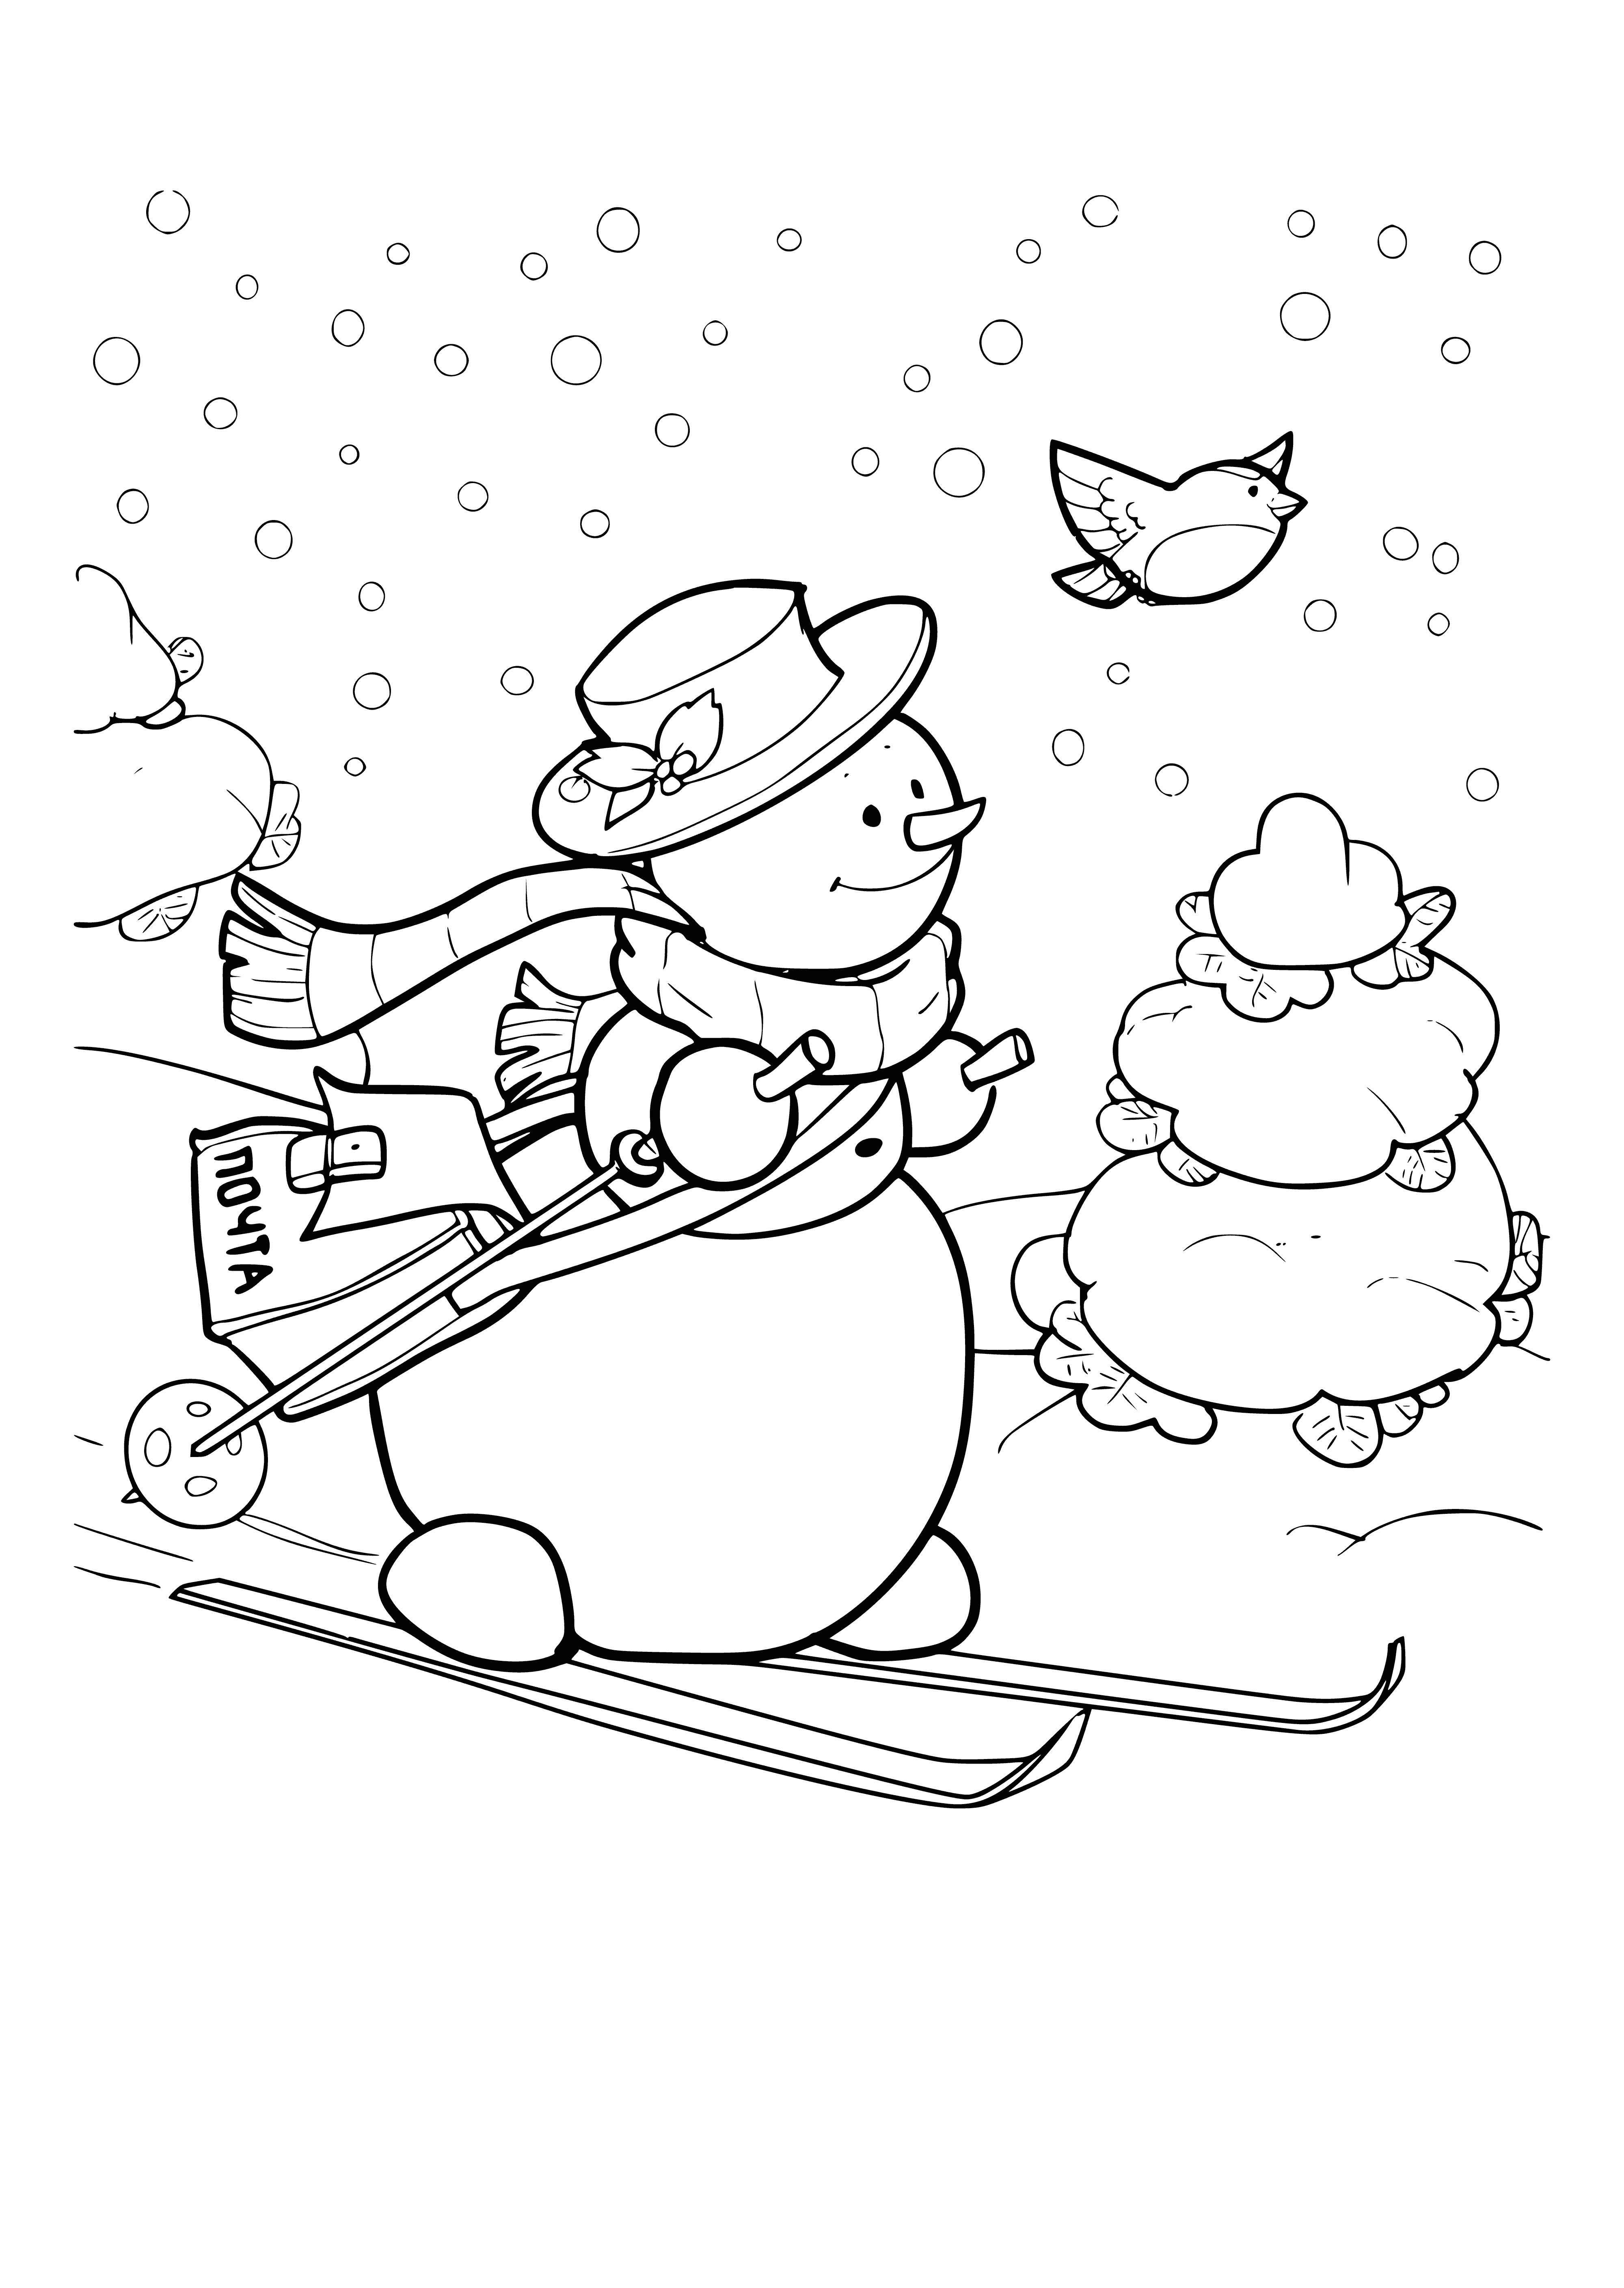 coloring page: Snowmen in a meadow w/ hats & scarves excitedly looking at a large envelope addressed to them, a sunlit sky & trees in the background.